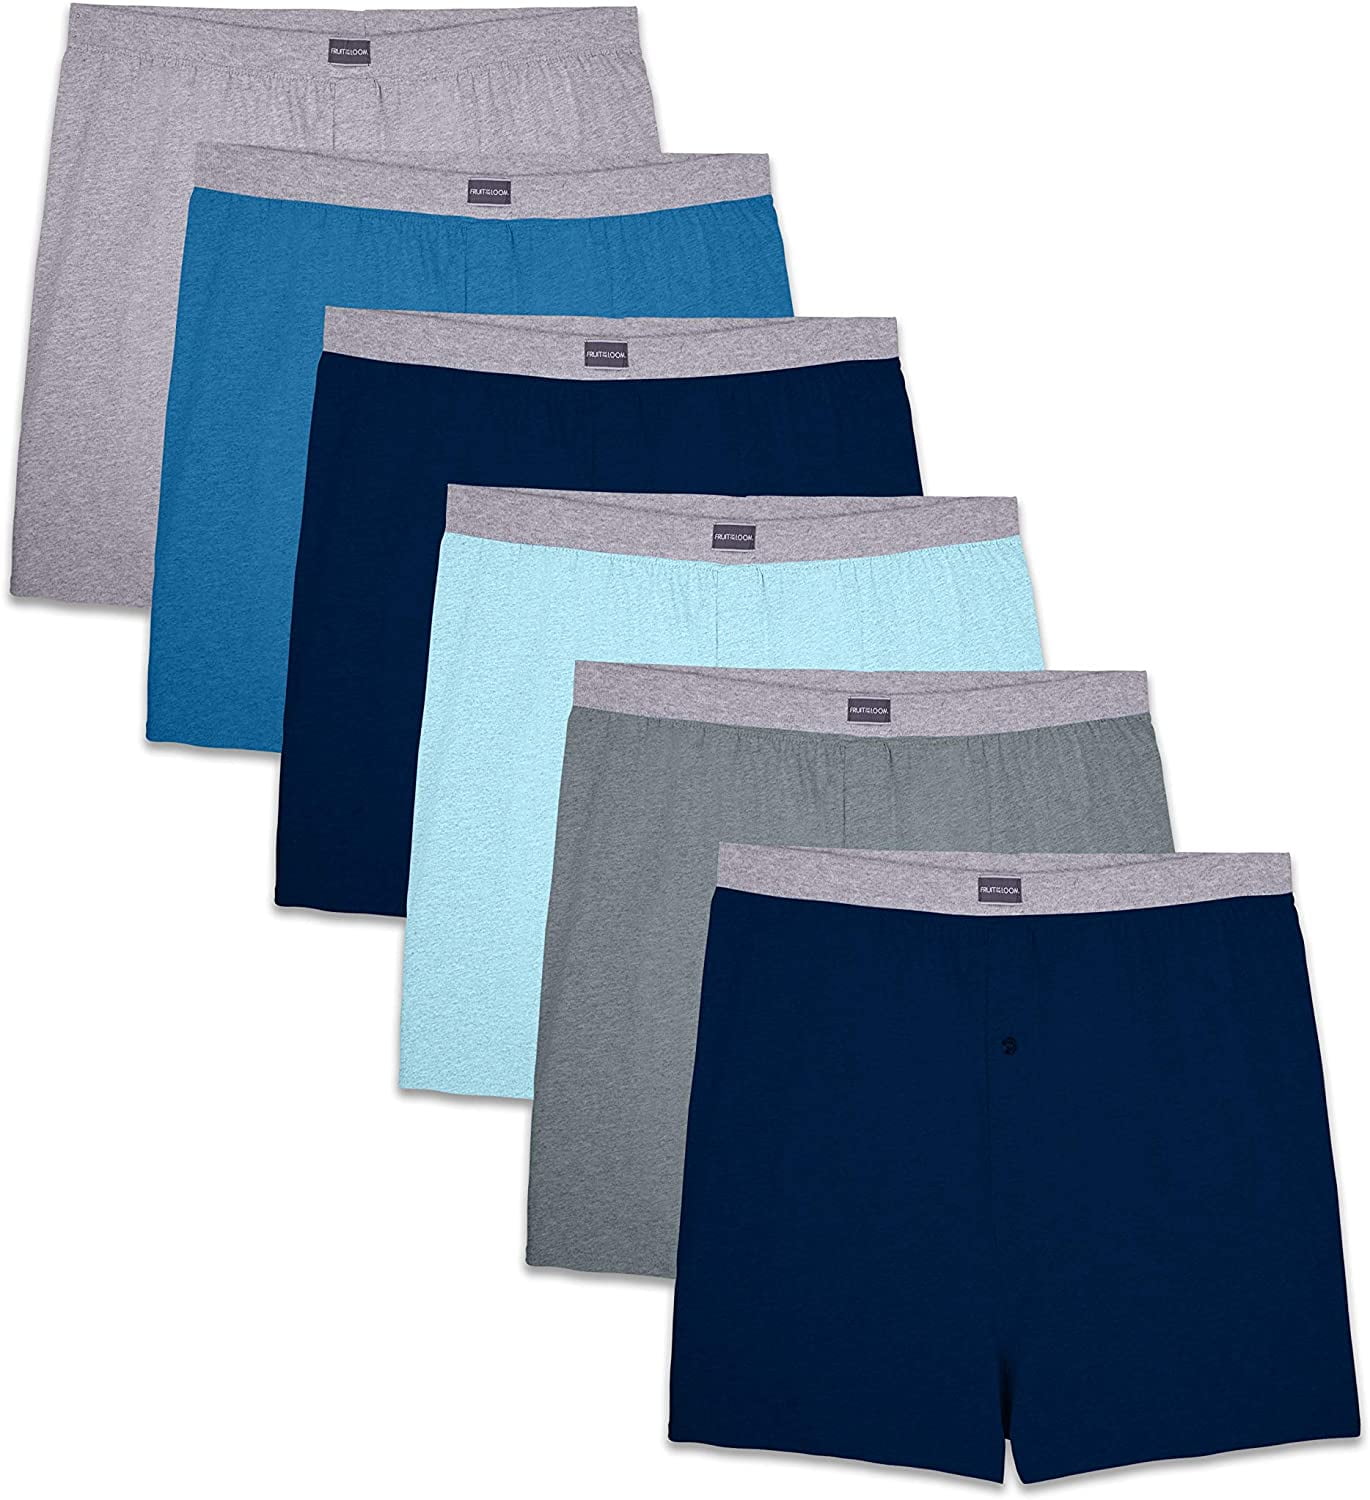 Fruit of the Loom Big Men's Cotton Stretch Boxer Briefs, 6 Pack